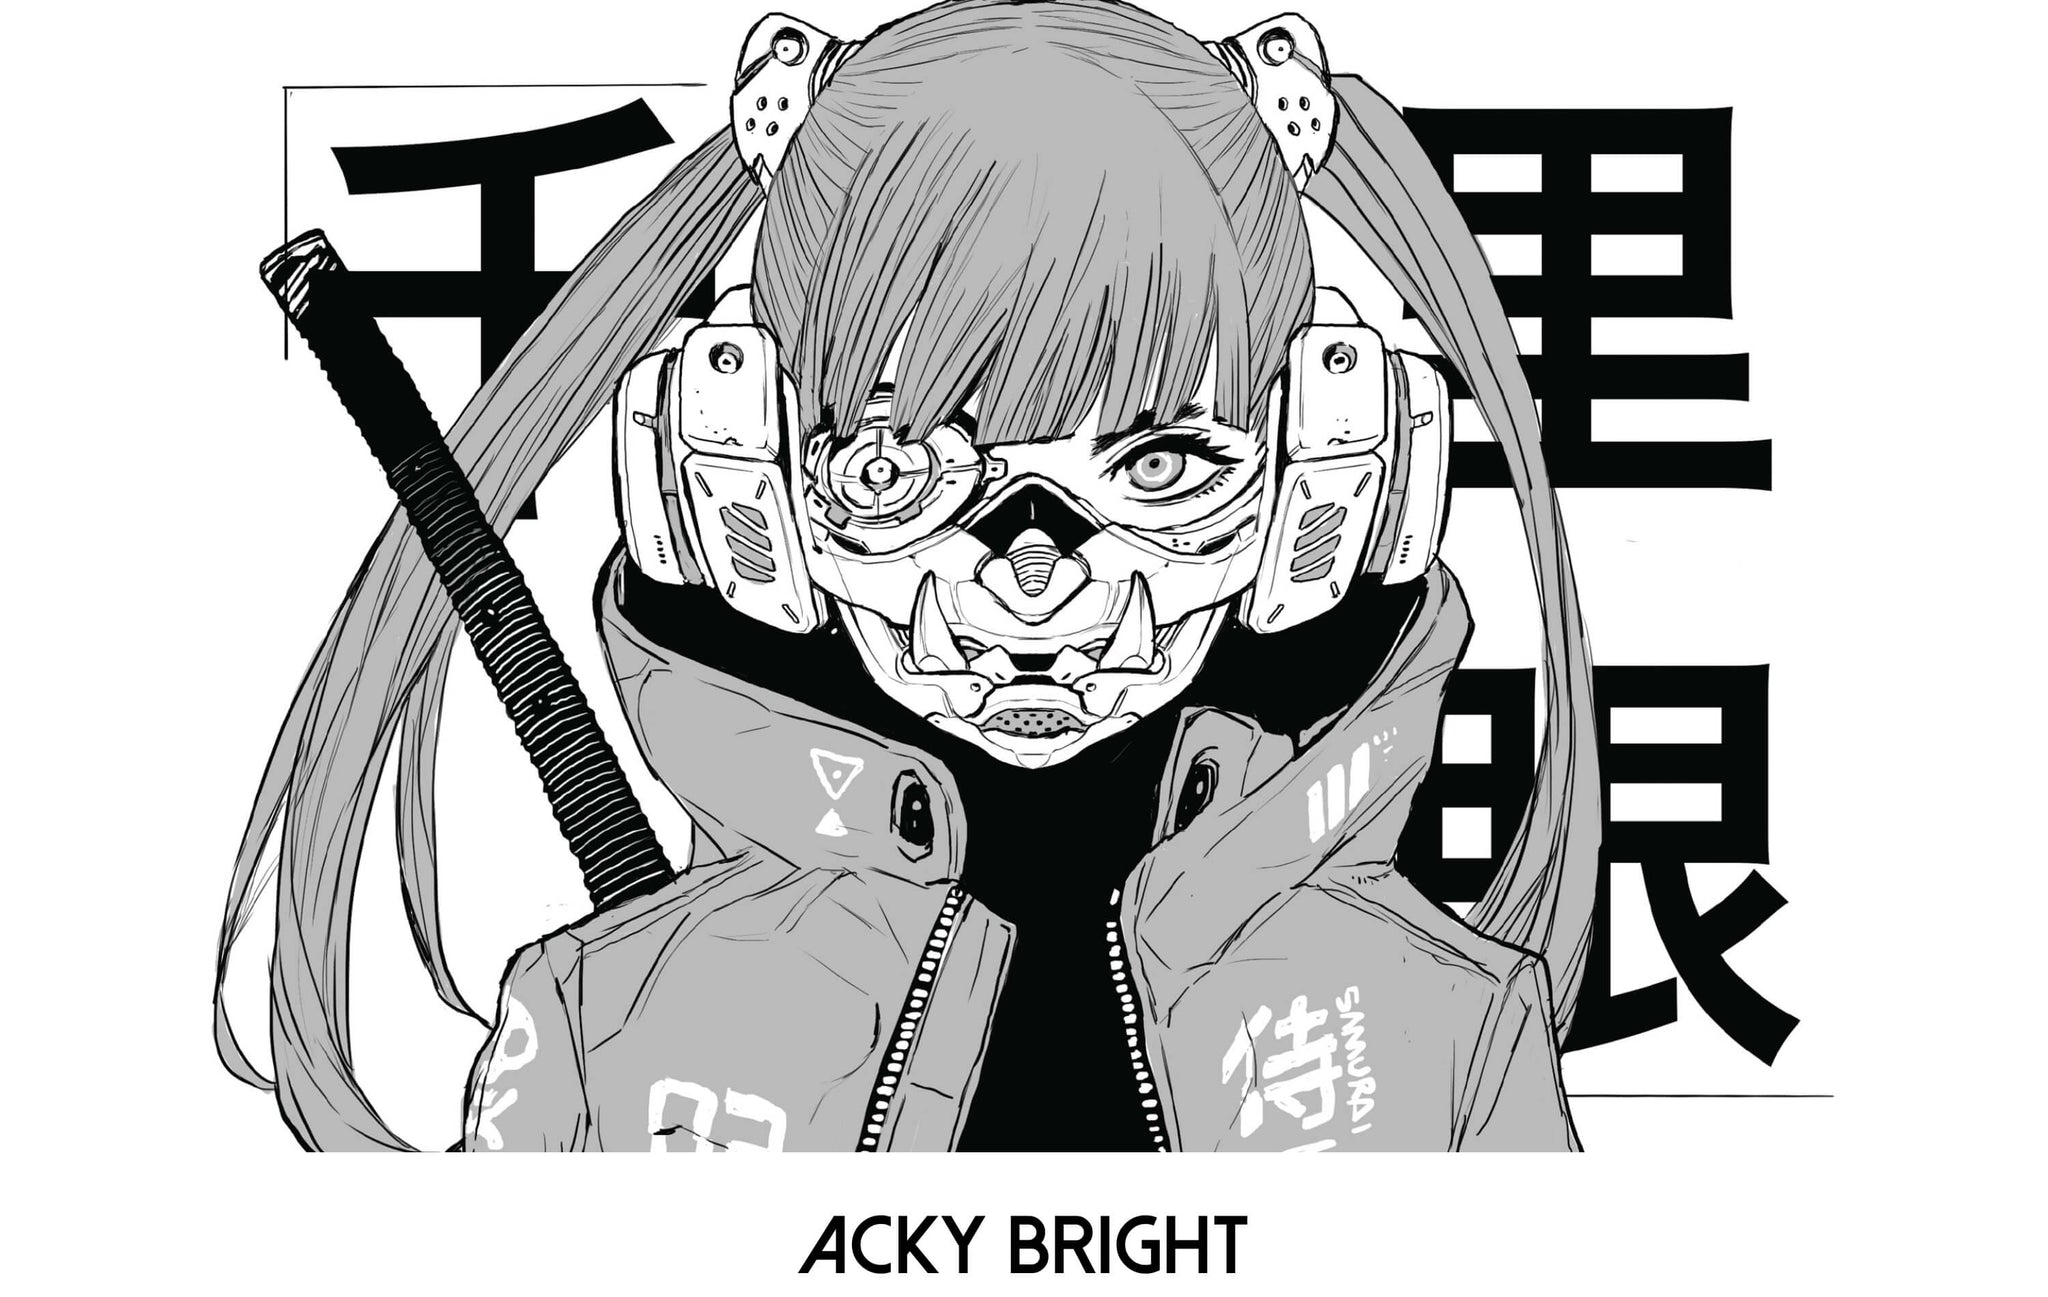 Learn more about Japanese artist Acky Bright.